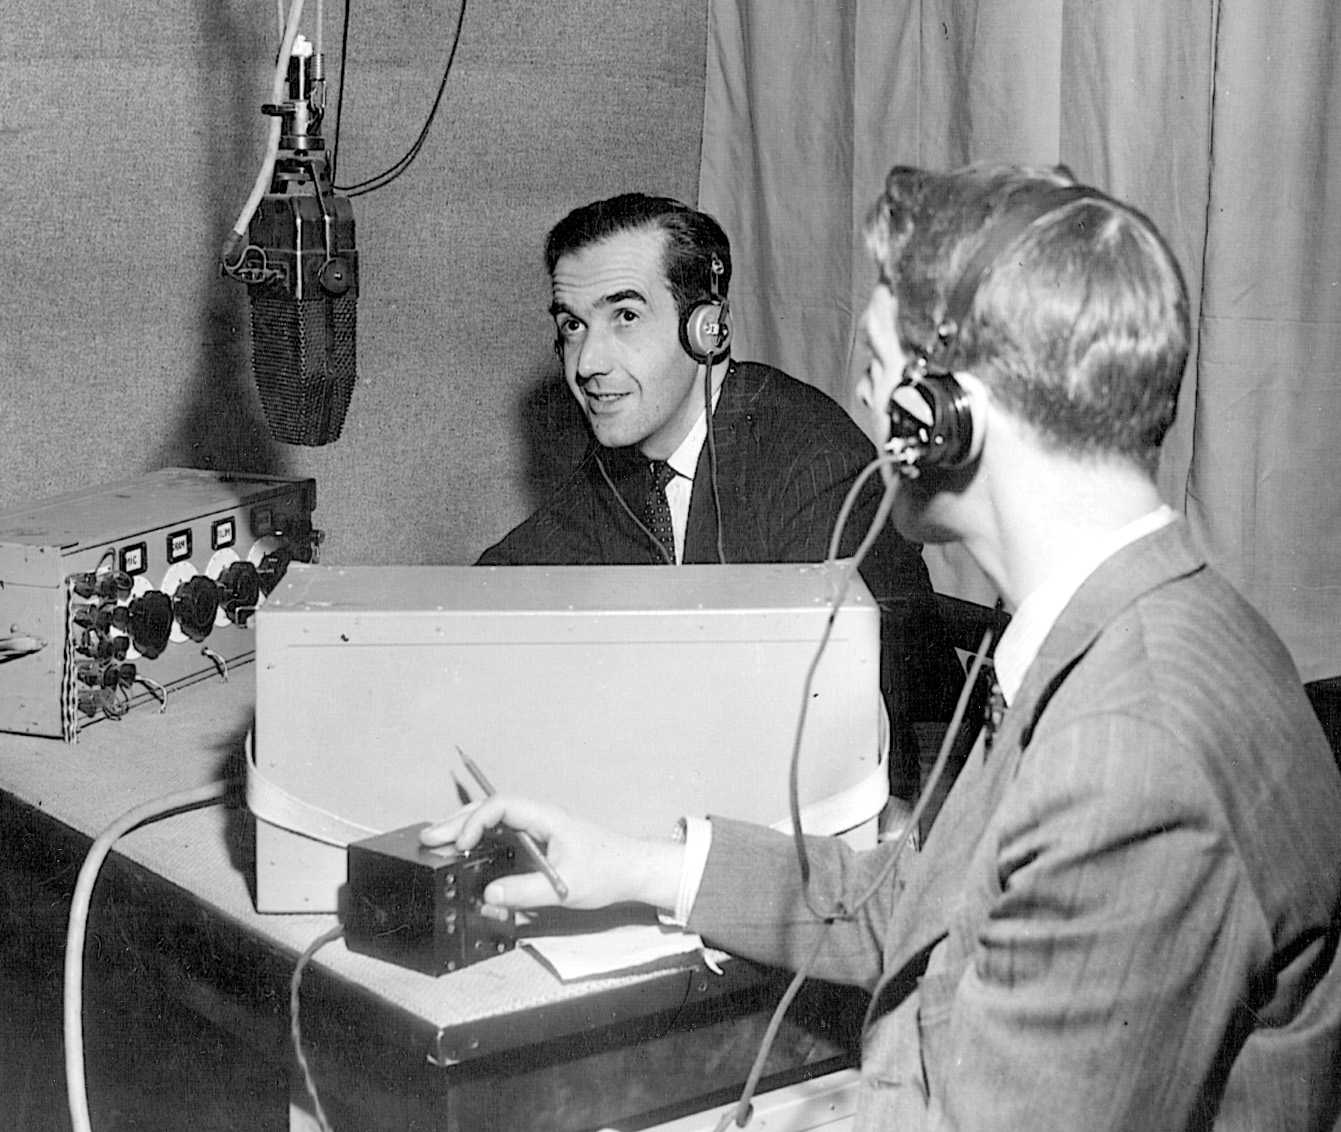 Edward R. Murrow at a radio station in London. His broadcasts helped swing America behind struggling Britain.